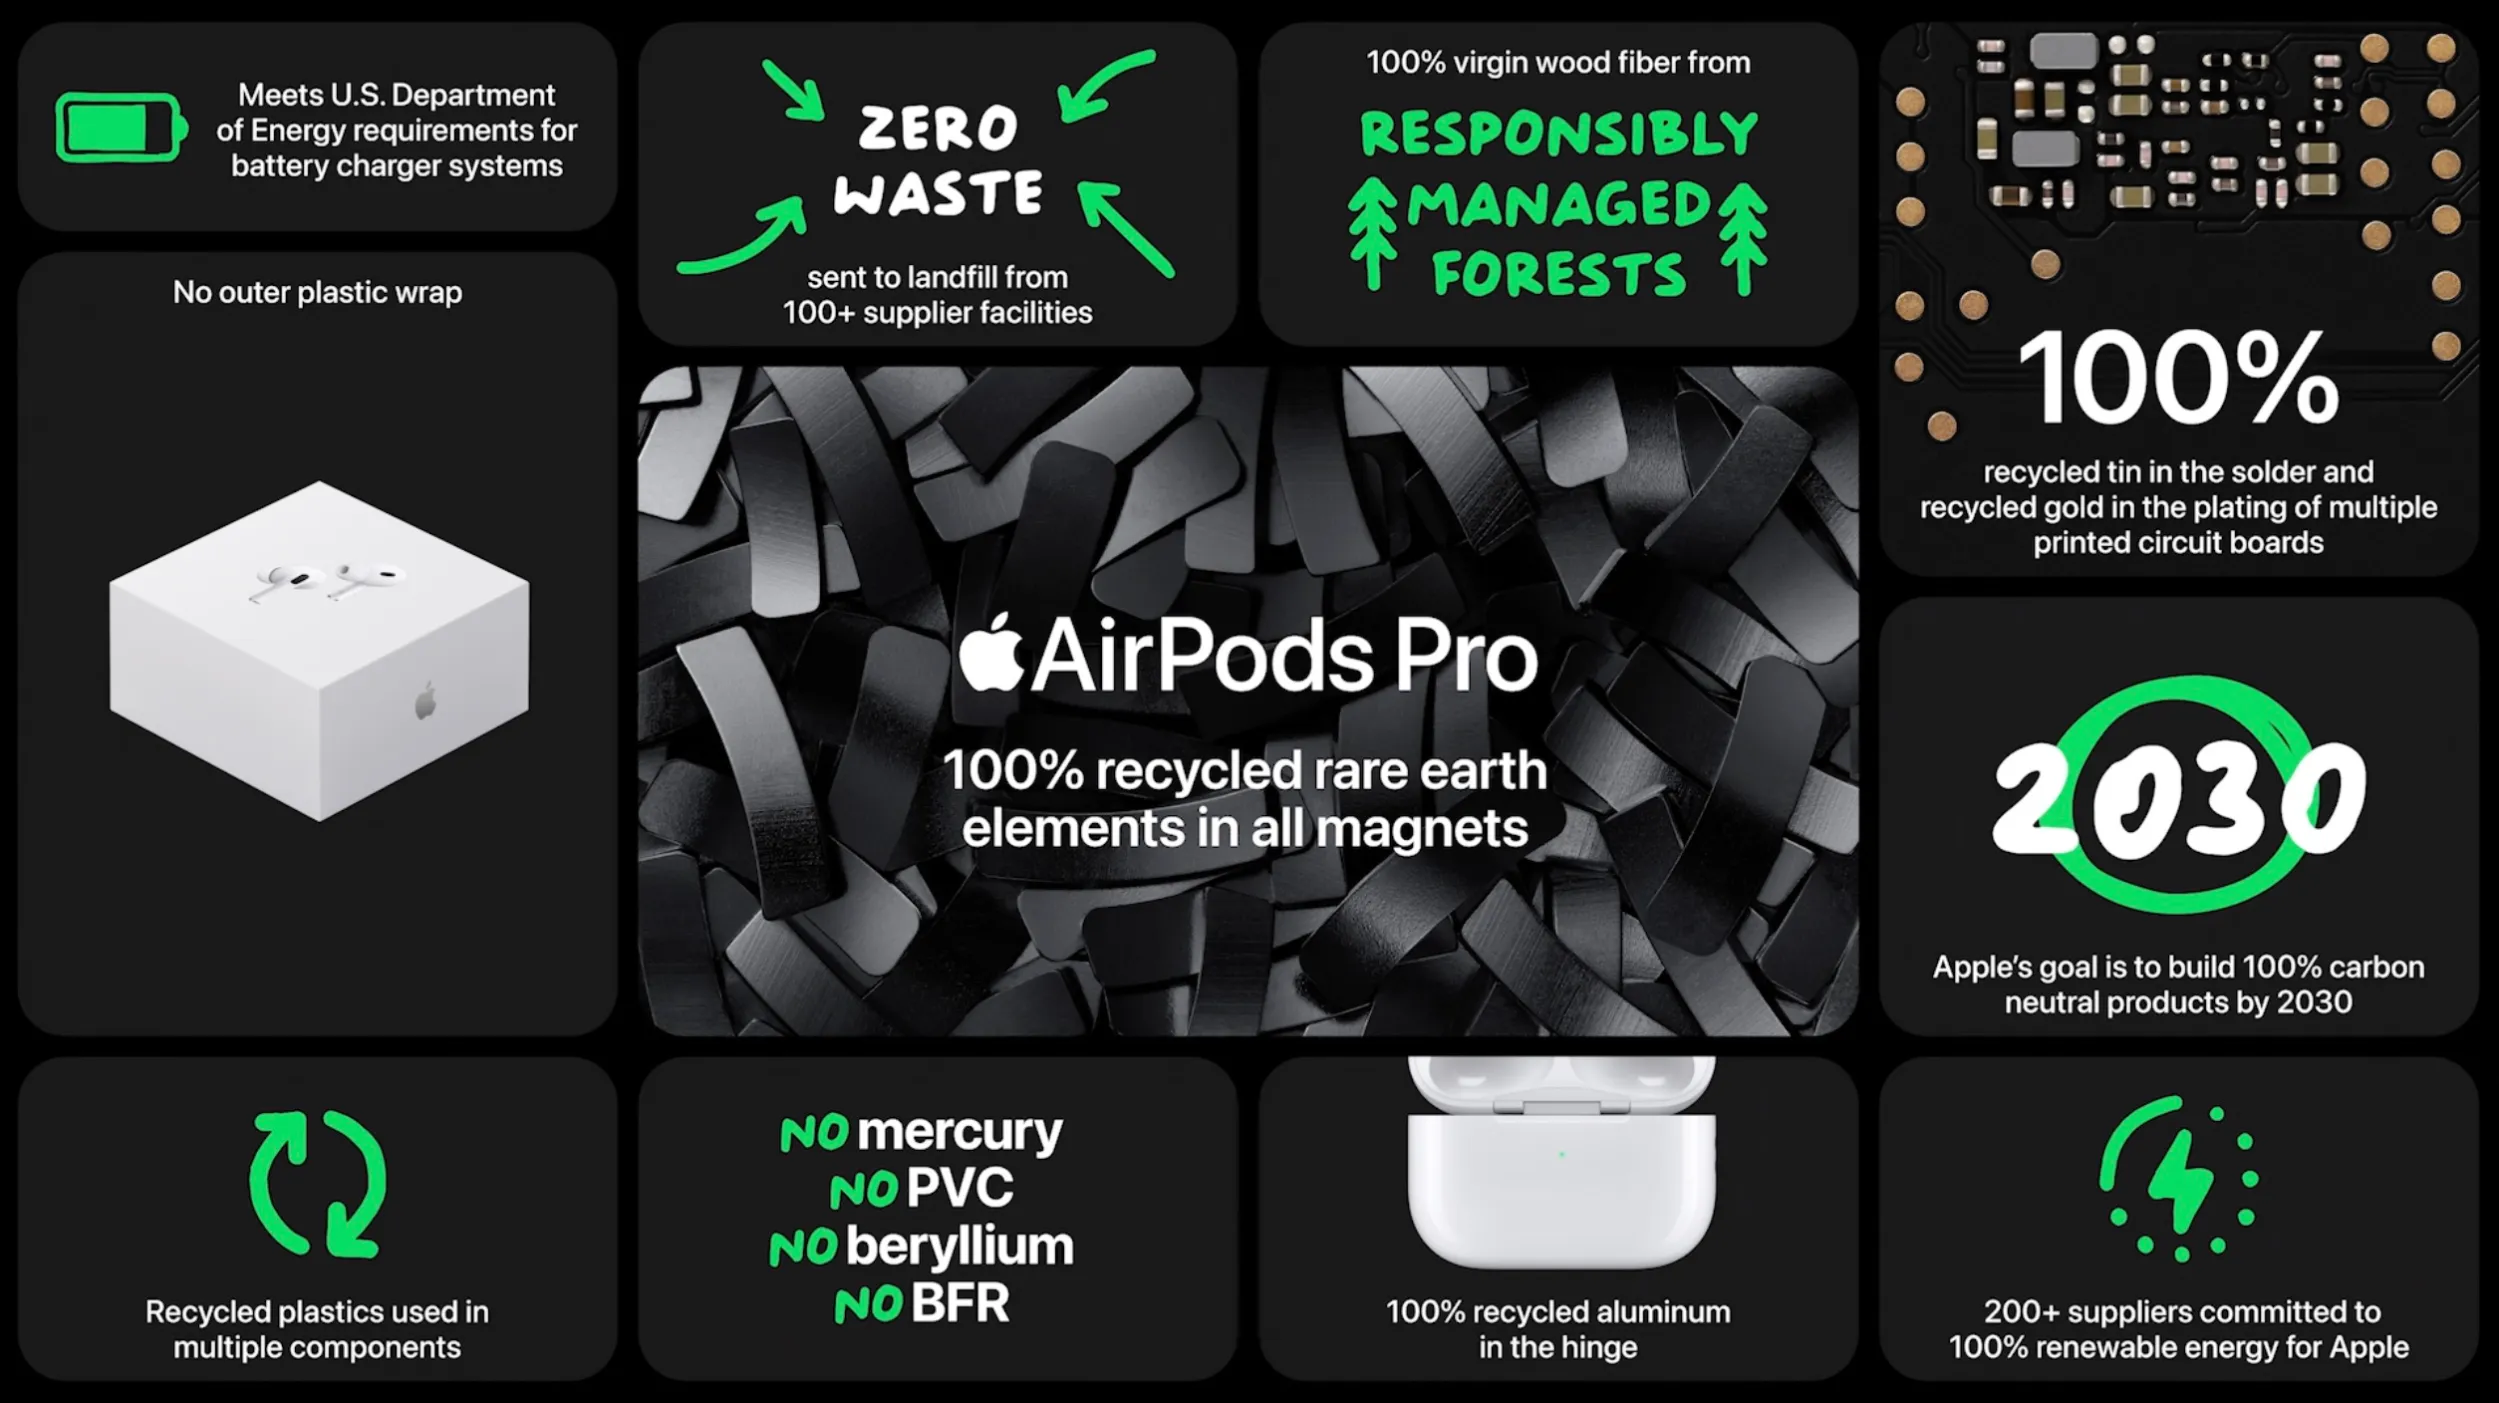 AirPods Pro 2: Apple updates premium earphones with H2 chip, touch control,  more - 9to5Mac